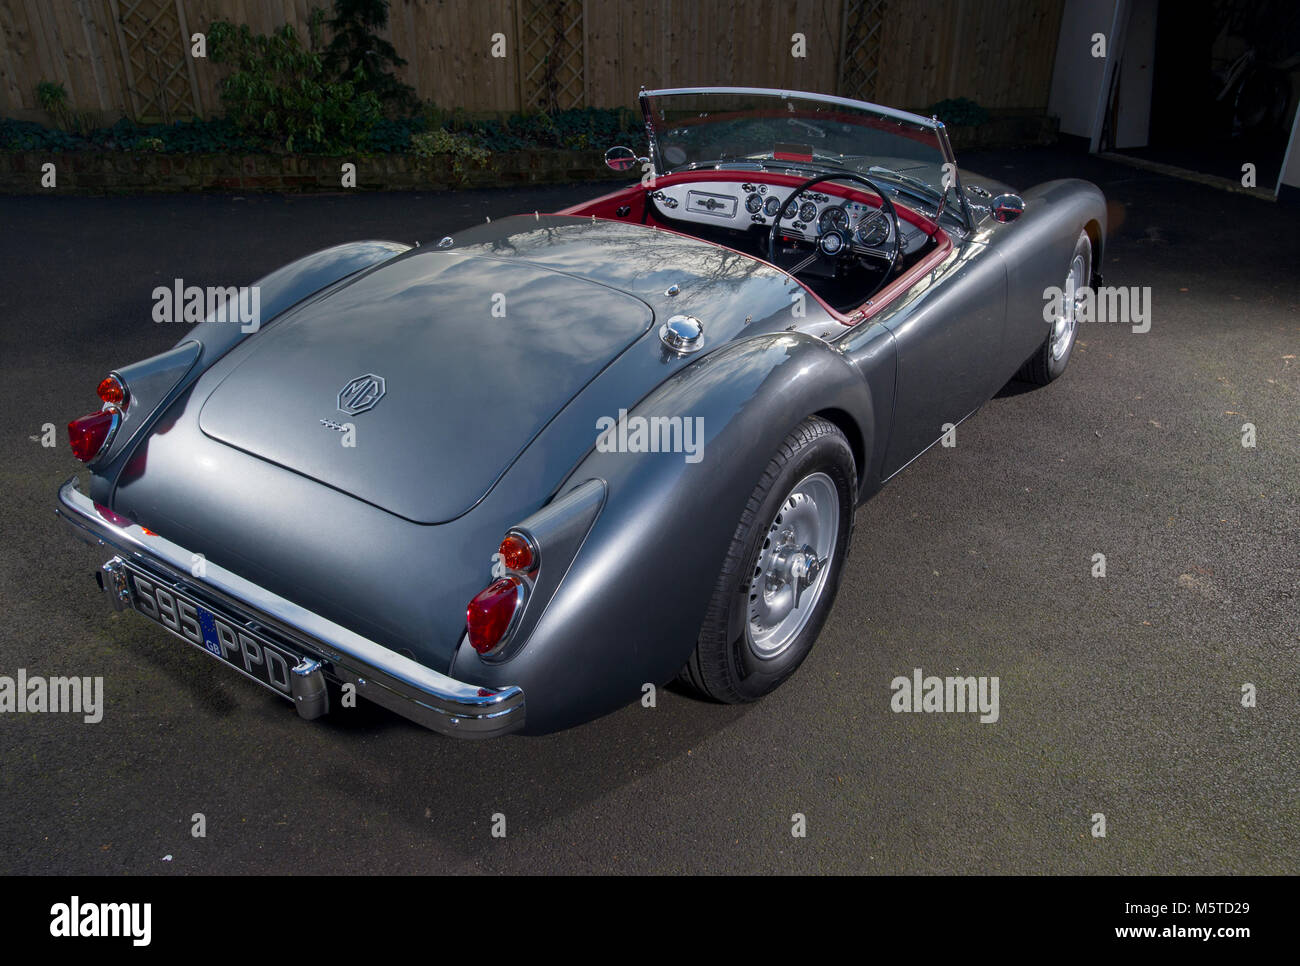 MGA Classic British sports car roadster con Dunlop ruote montate Foto Stock